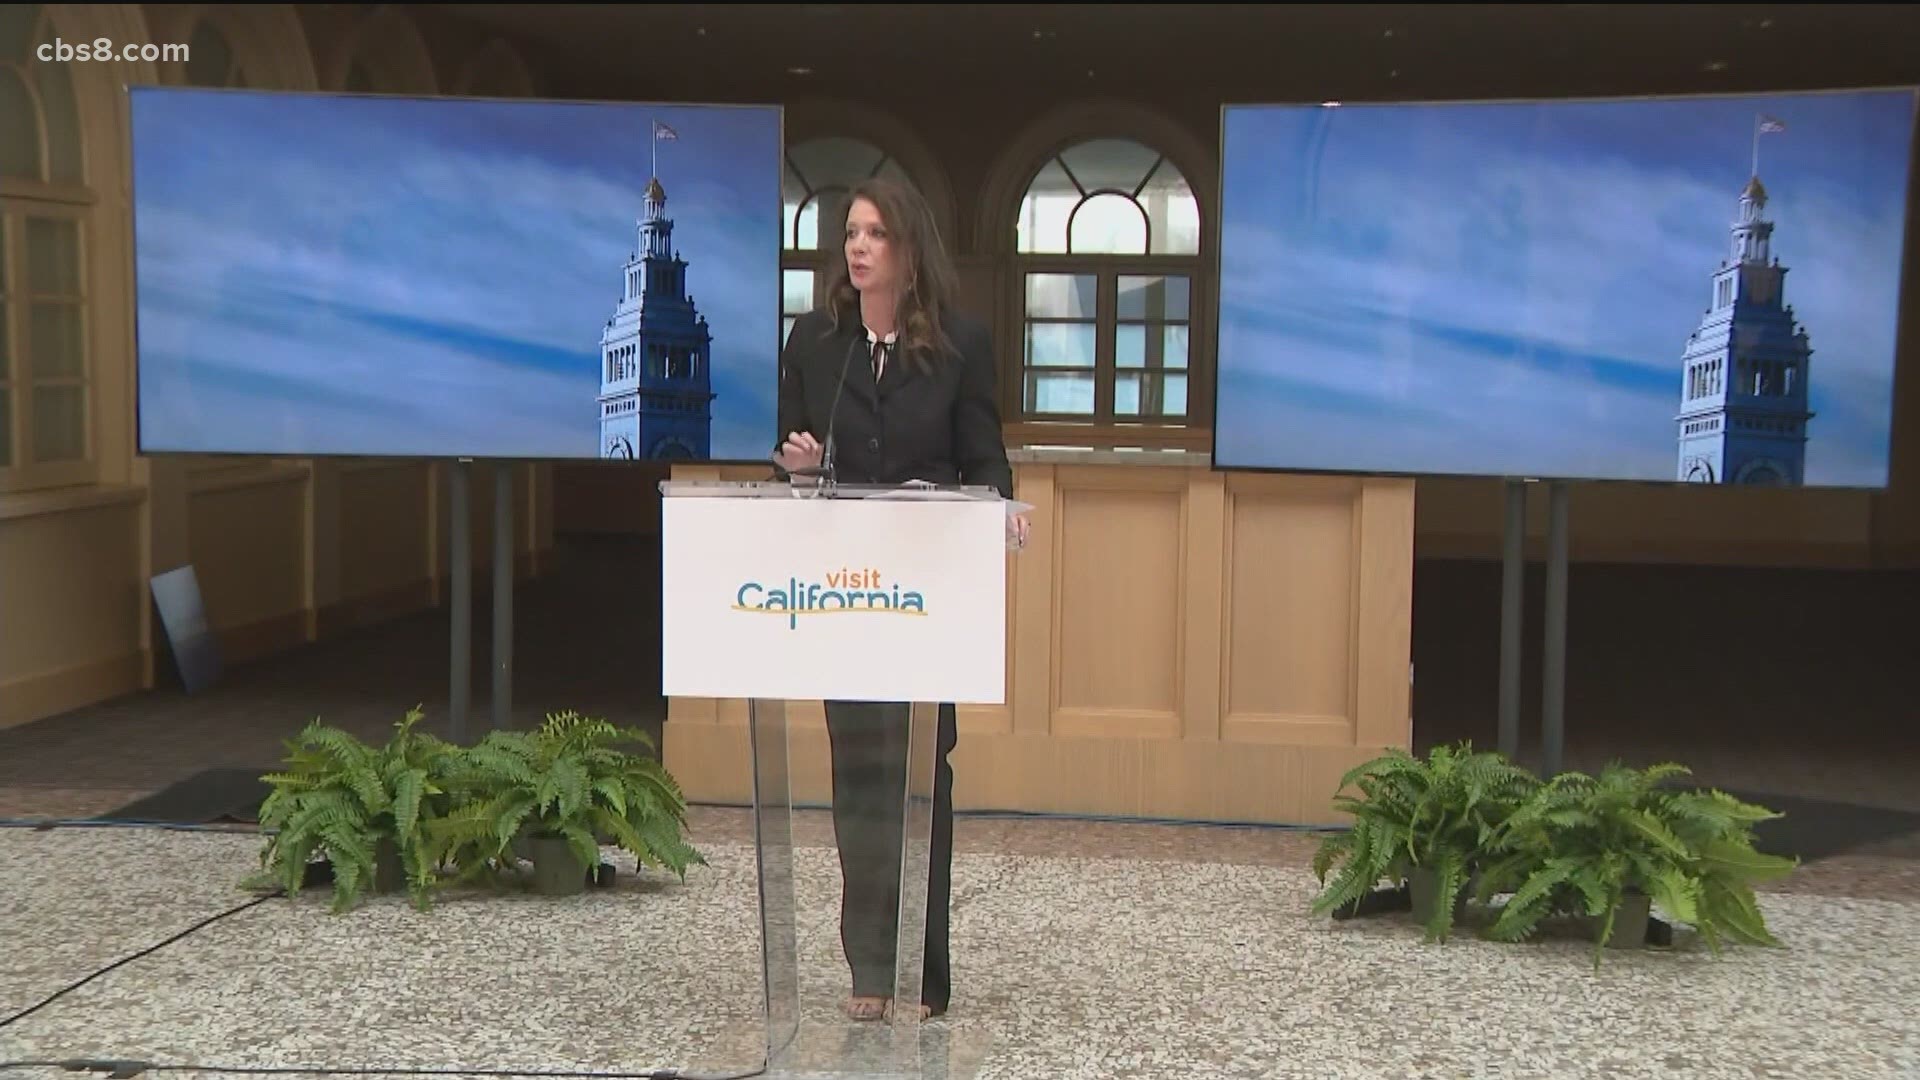 The governor announced a new incentive for Californians to get vaccinated, called "California Dream Vacations" as part of the state's 'Vax for the Win' program.